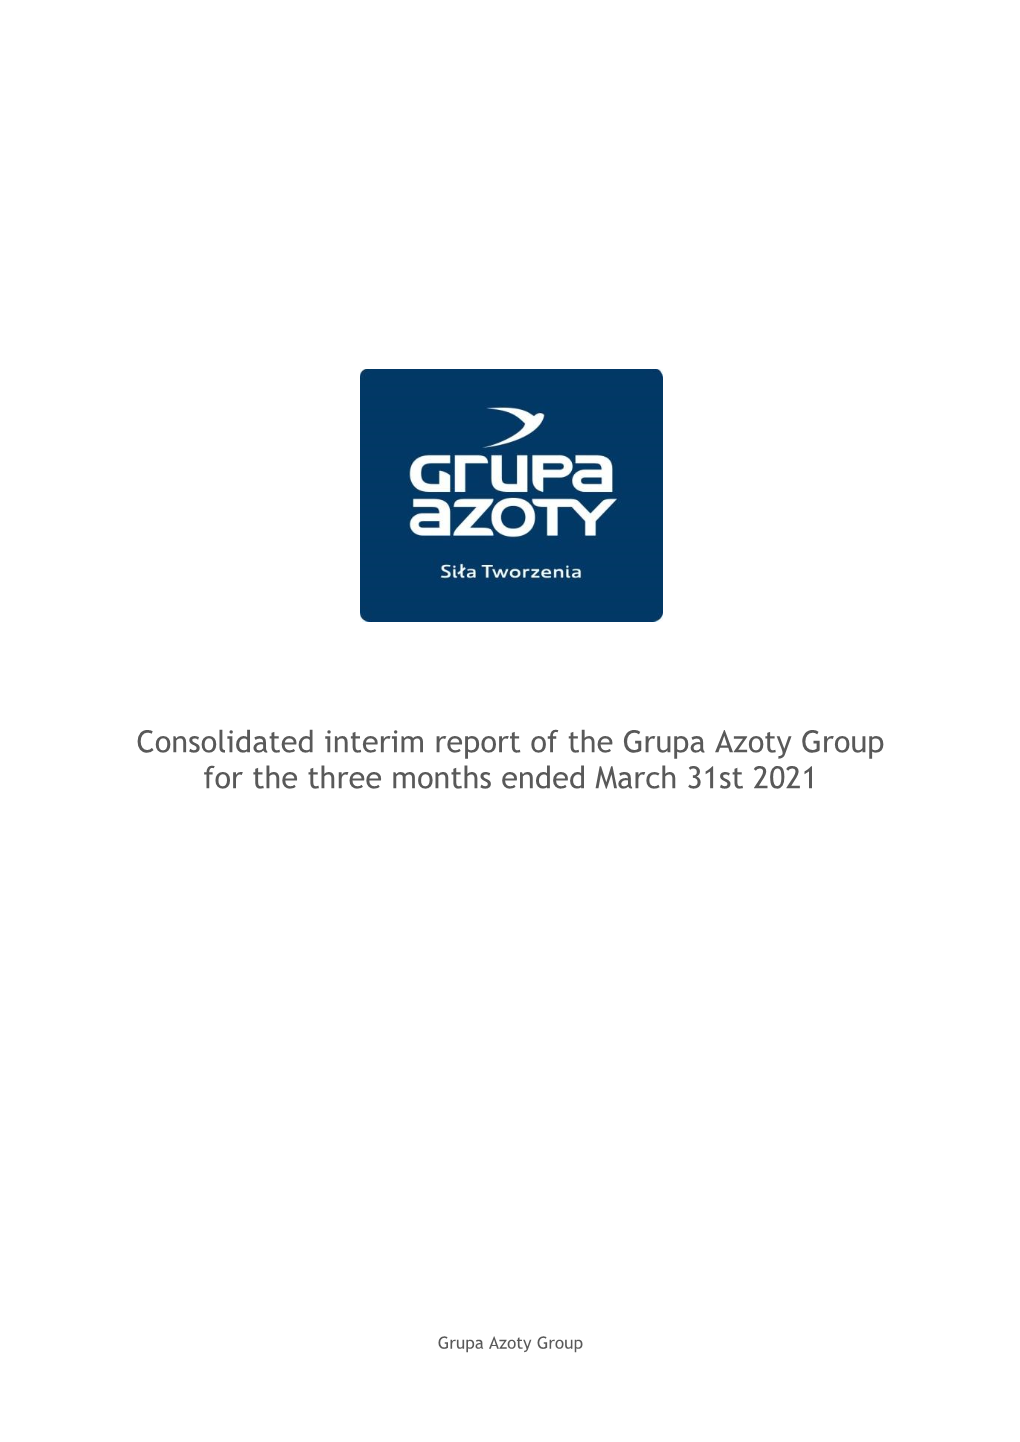 Consolidated Interim Report of the Grupa Azoty Group for the Three Months Ended March 31St 2021